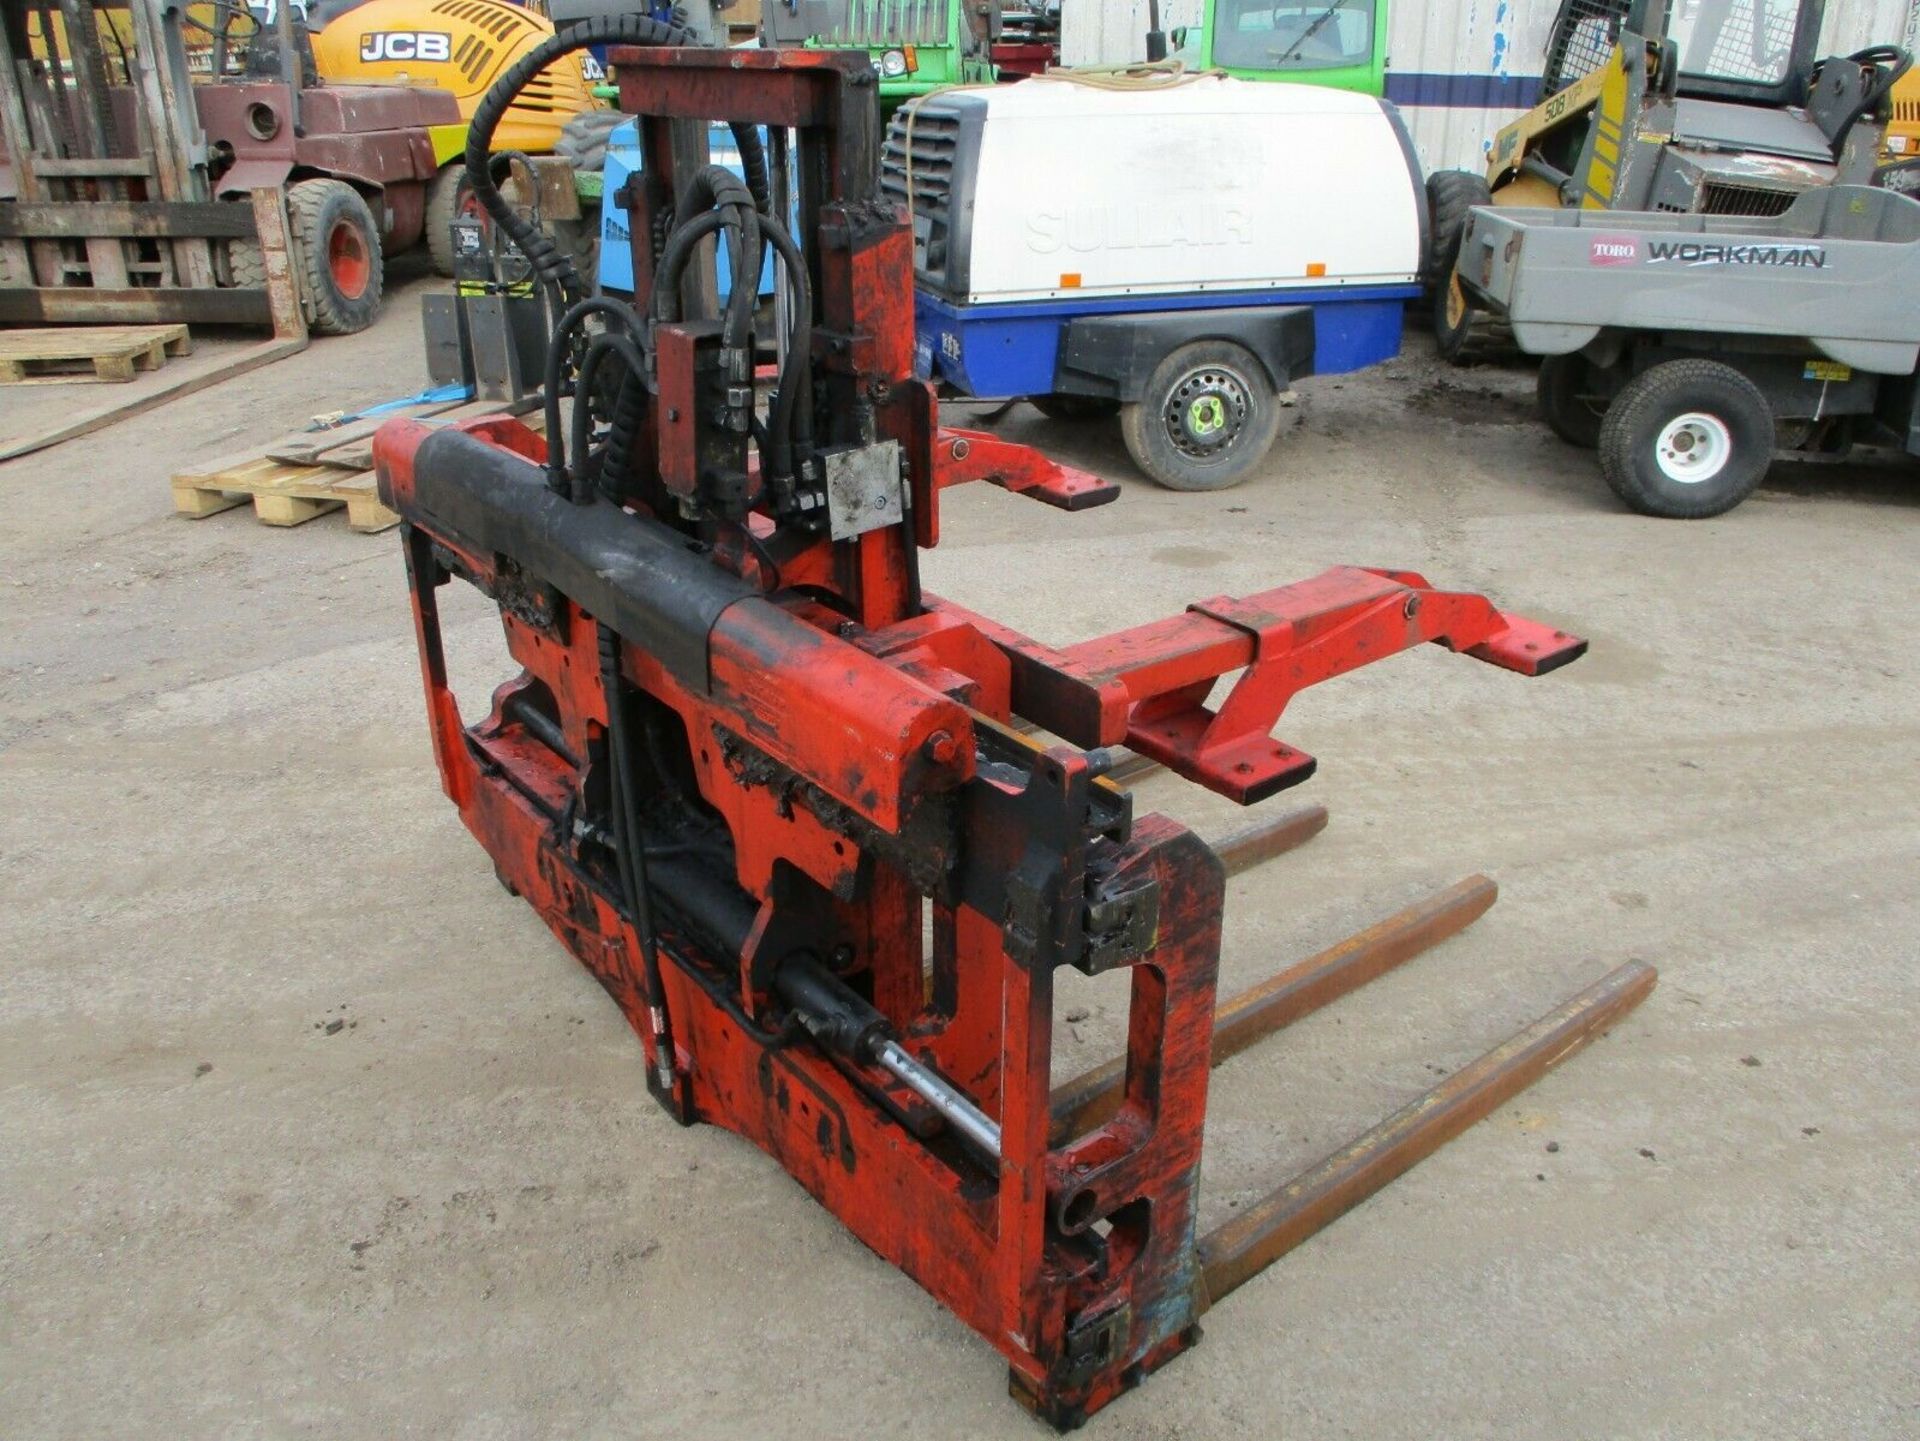 Kaup multi pallet lifter - Image 5 of 6